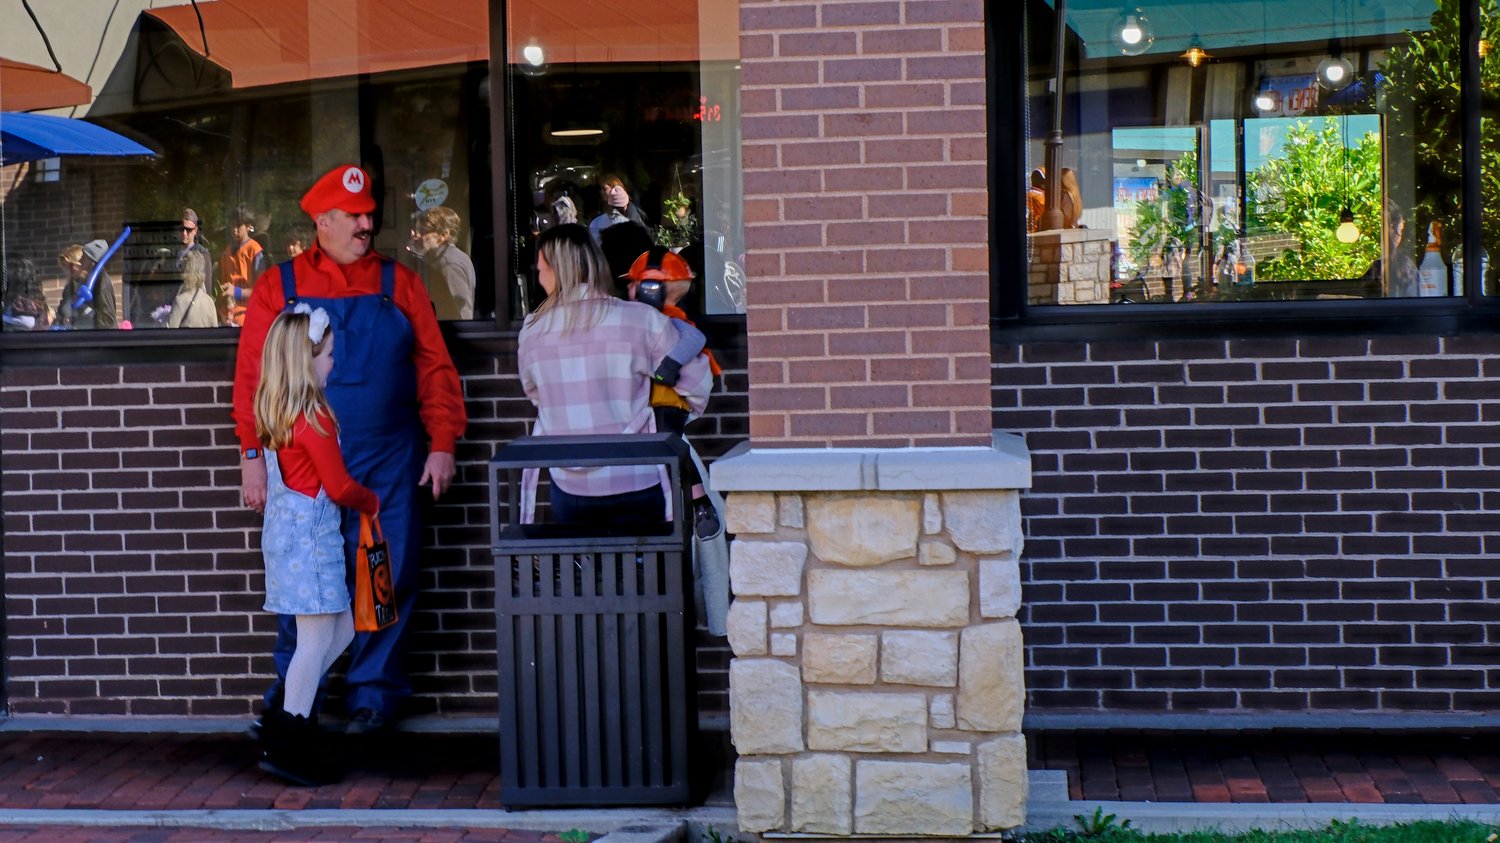 Trick-or-treaters chatting with Star 105.5's Joe "Mario" Cicero.